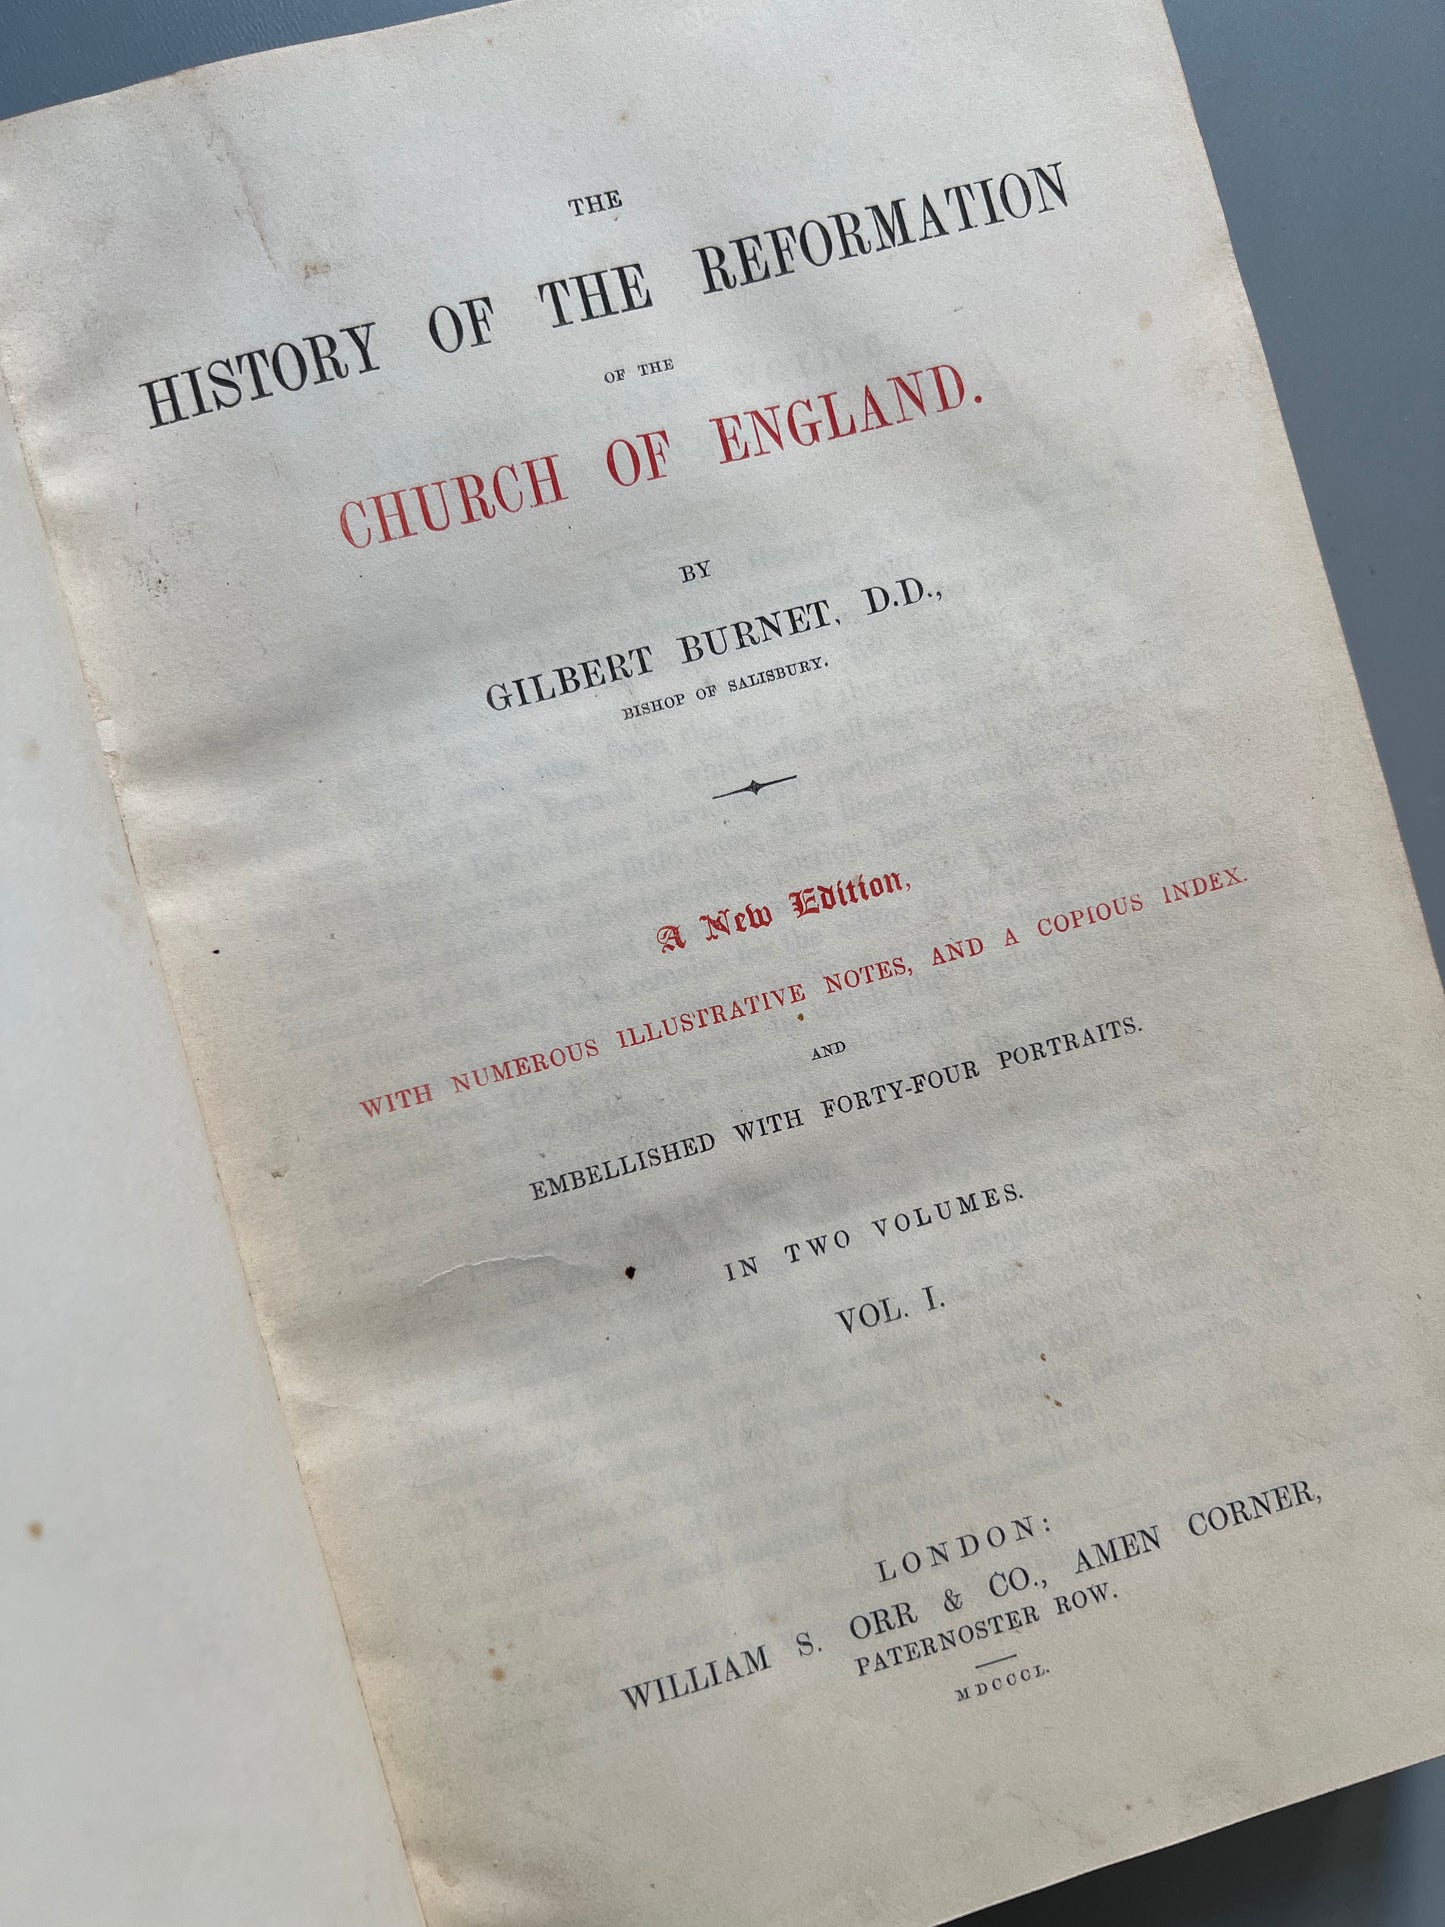 The history of the reformation of the church of England, Gilbert Burnet - William S. Obr & Co Amen corner, 1850